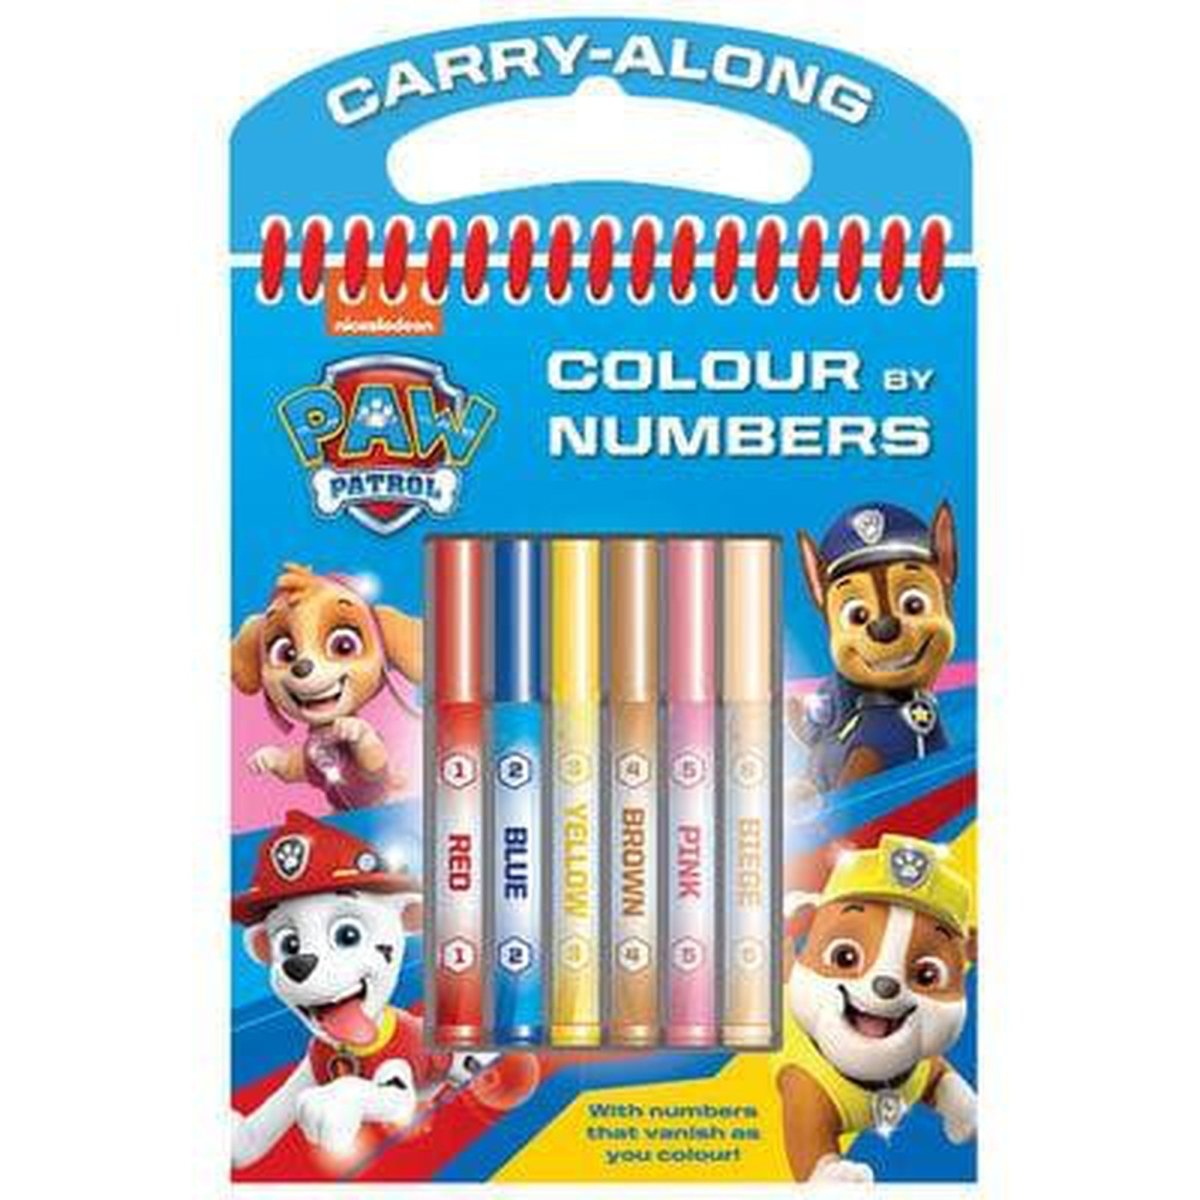 Paw Patrol Colour by Numbers - Kids Party Craft